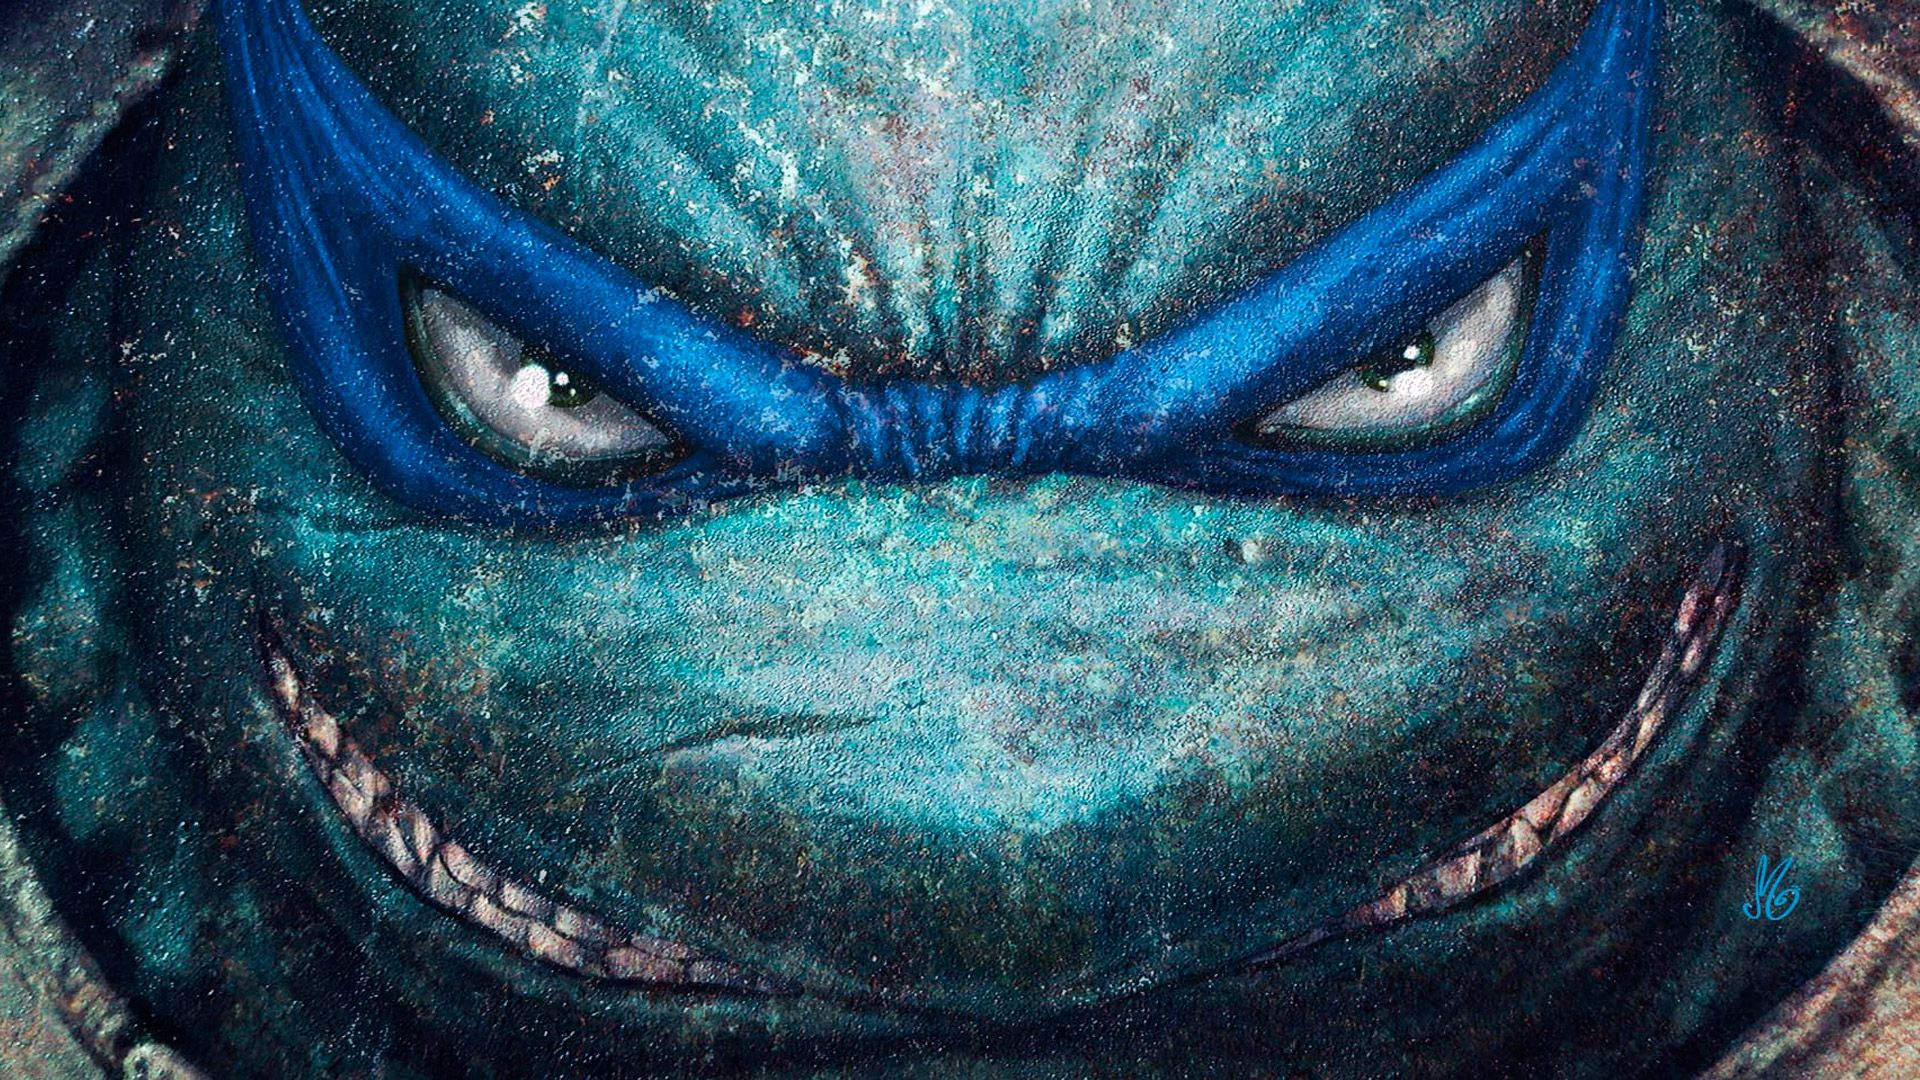 Desktop Wallpaper Teenage Mutant Ninja Turtle Angry Face, HD Image, Picture, Background, Vunghq